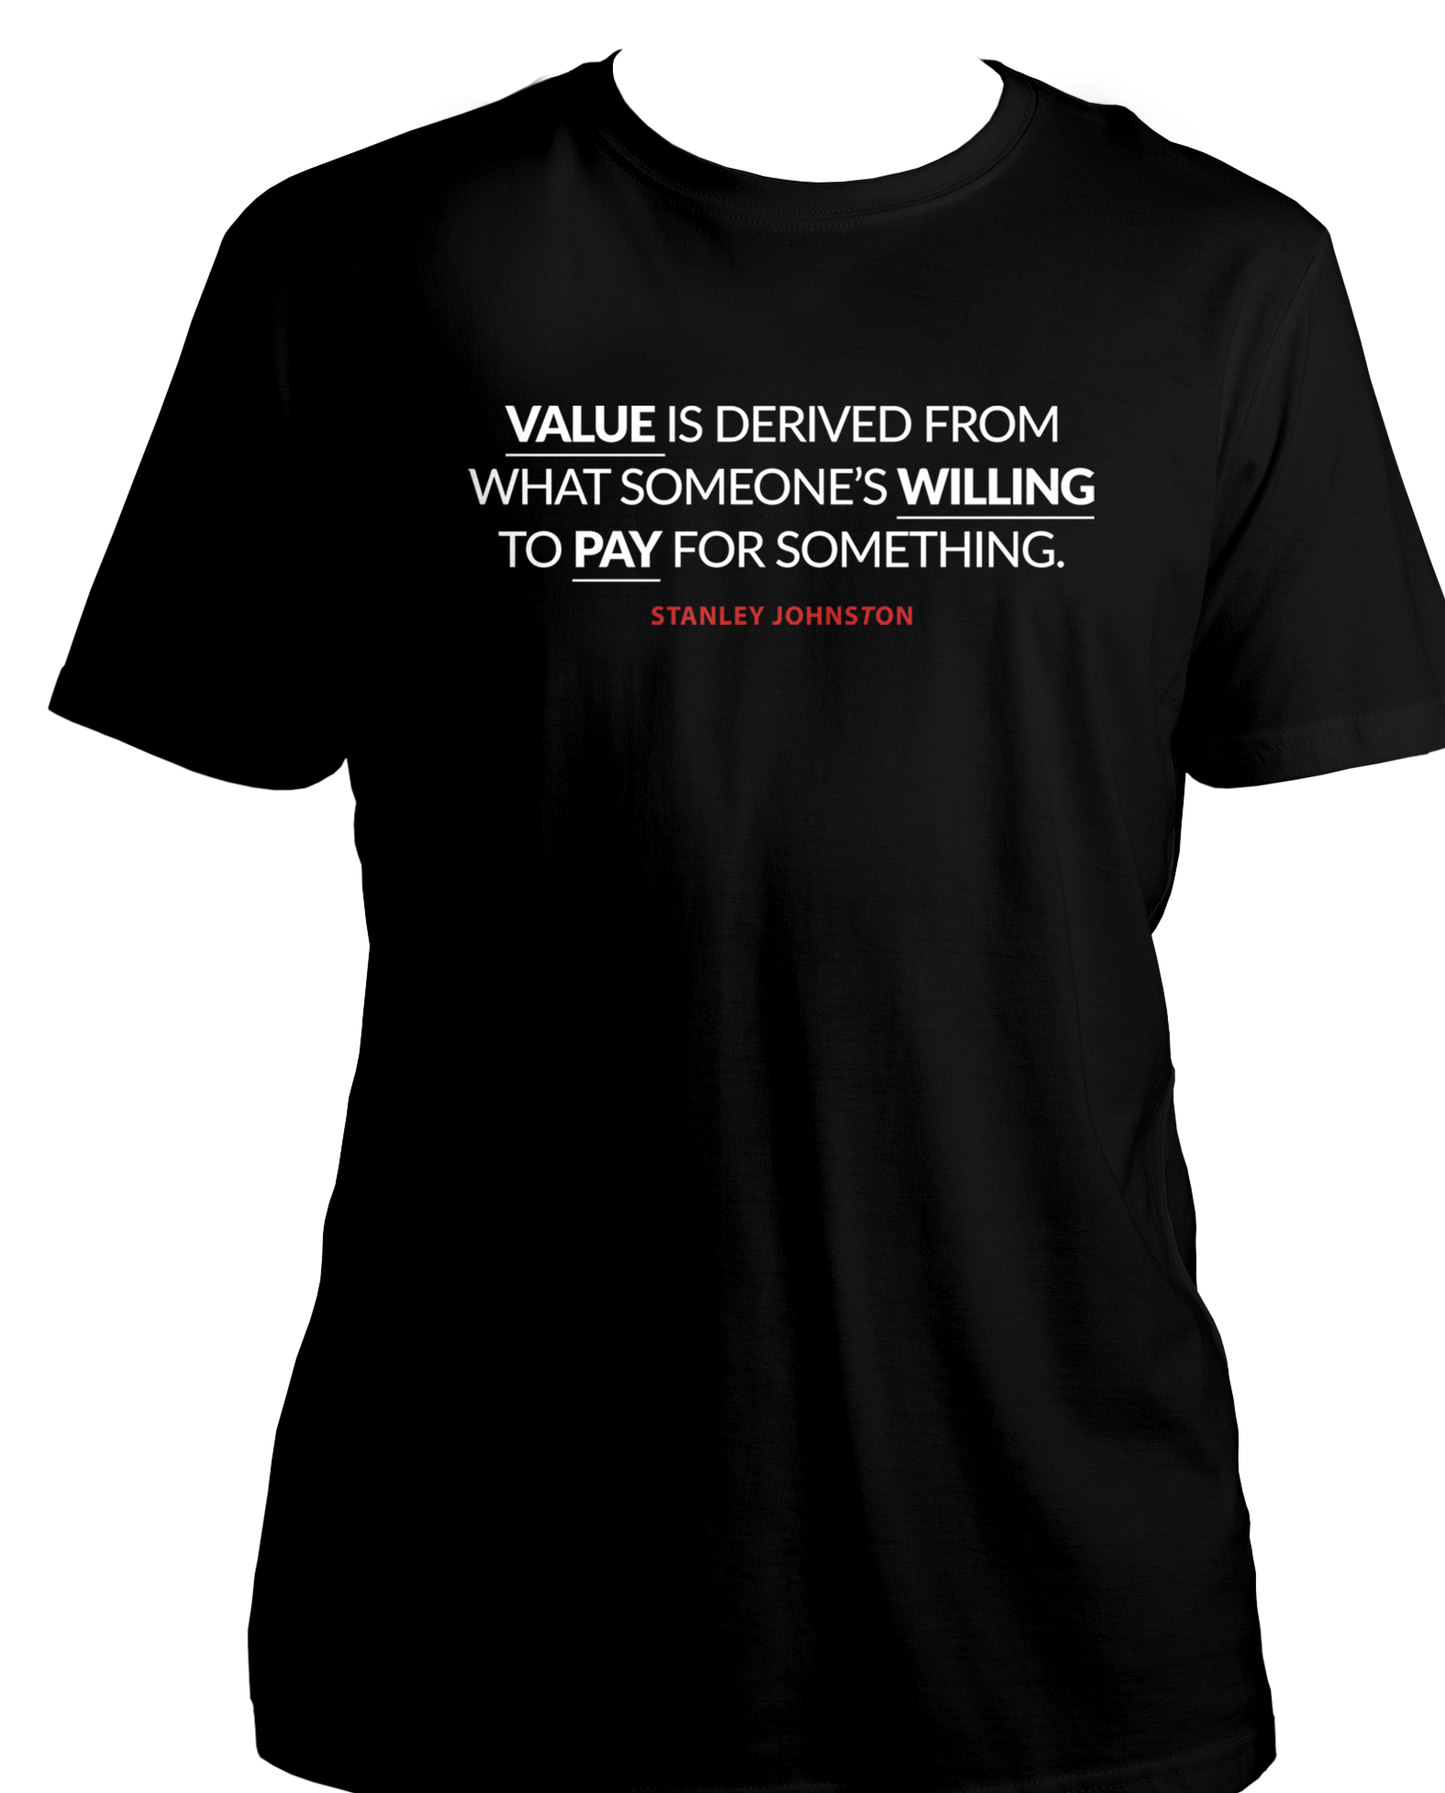 Featuring a fabulous quote from Stanley Johnston in the show – "Value is derived from what someone's willing to pay for something." – our t-shirts not only capture the essence of the series but also make a bold fashion statement.